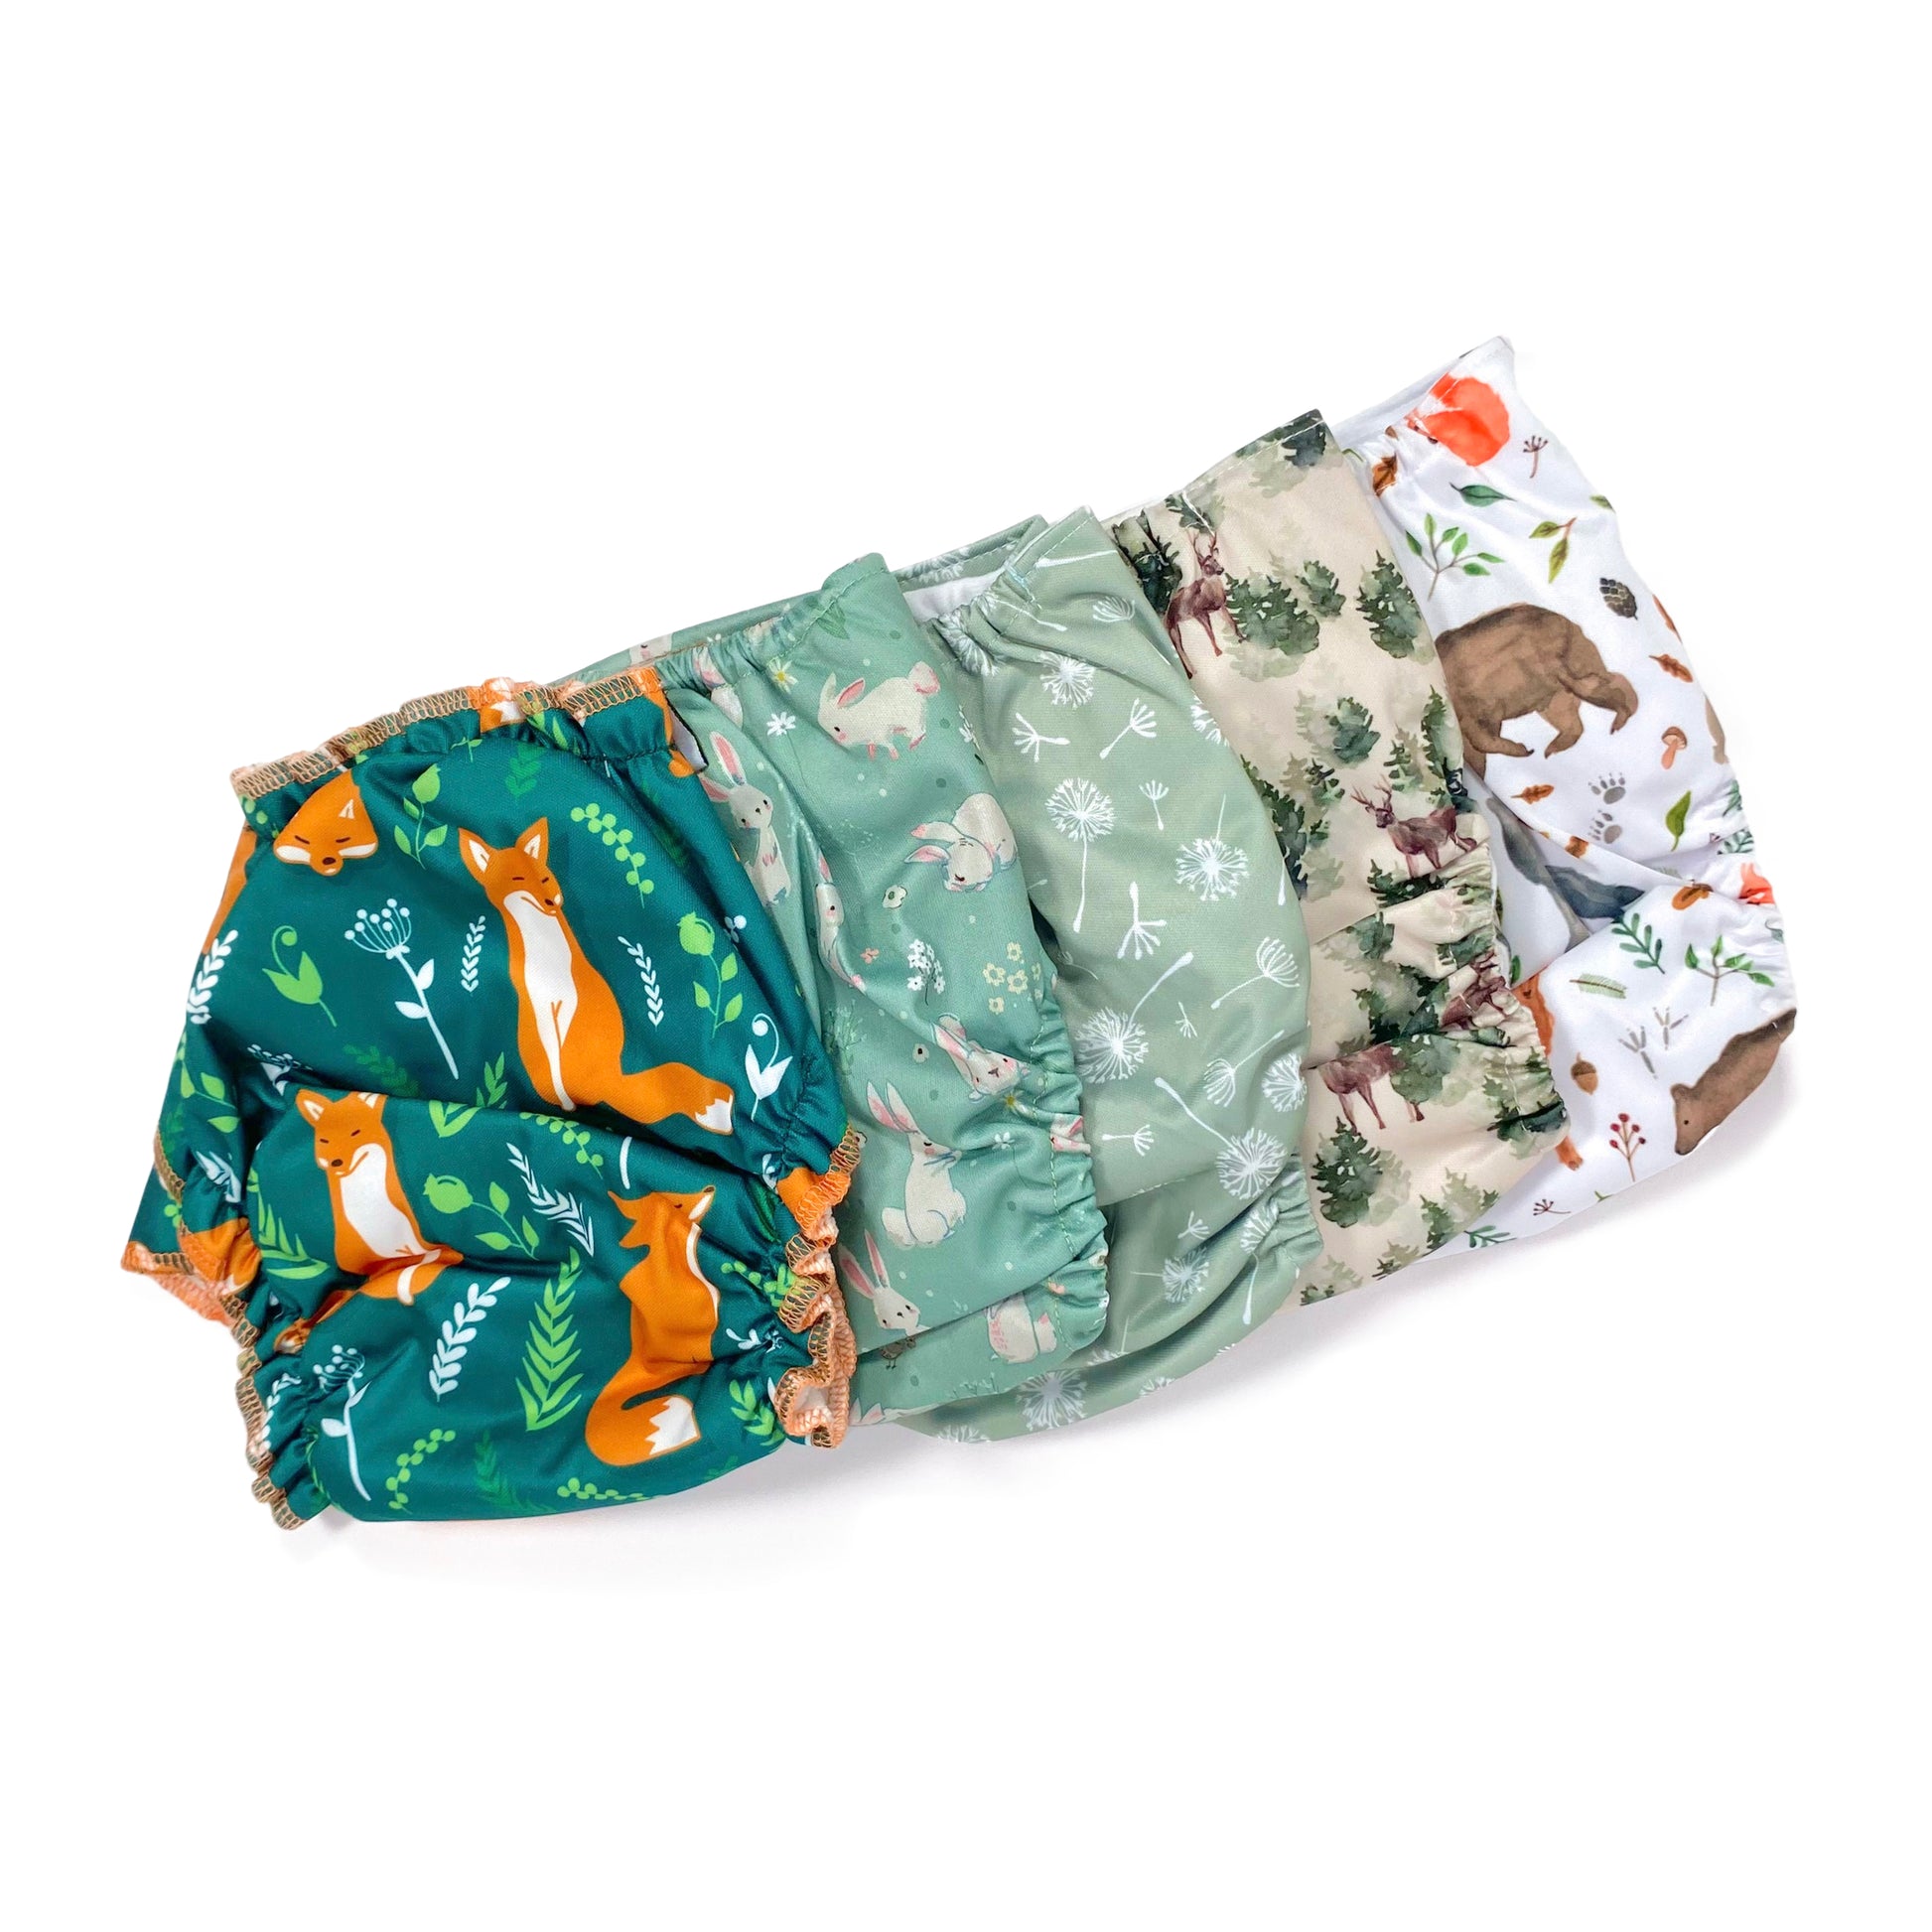 A set of five reusable nappies, made from 100% recycled polyester. The included nappies are: Woodland Friends, Winter Forest, Green Dandelion, Green Rabbits and Green Fox. View shows all five nappies back facing, in a diagonal line.